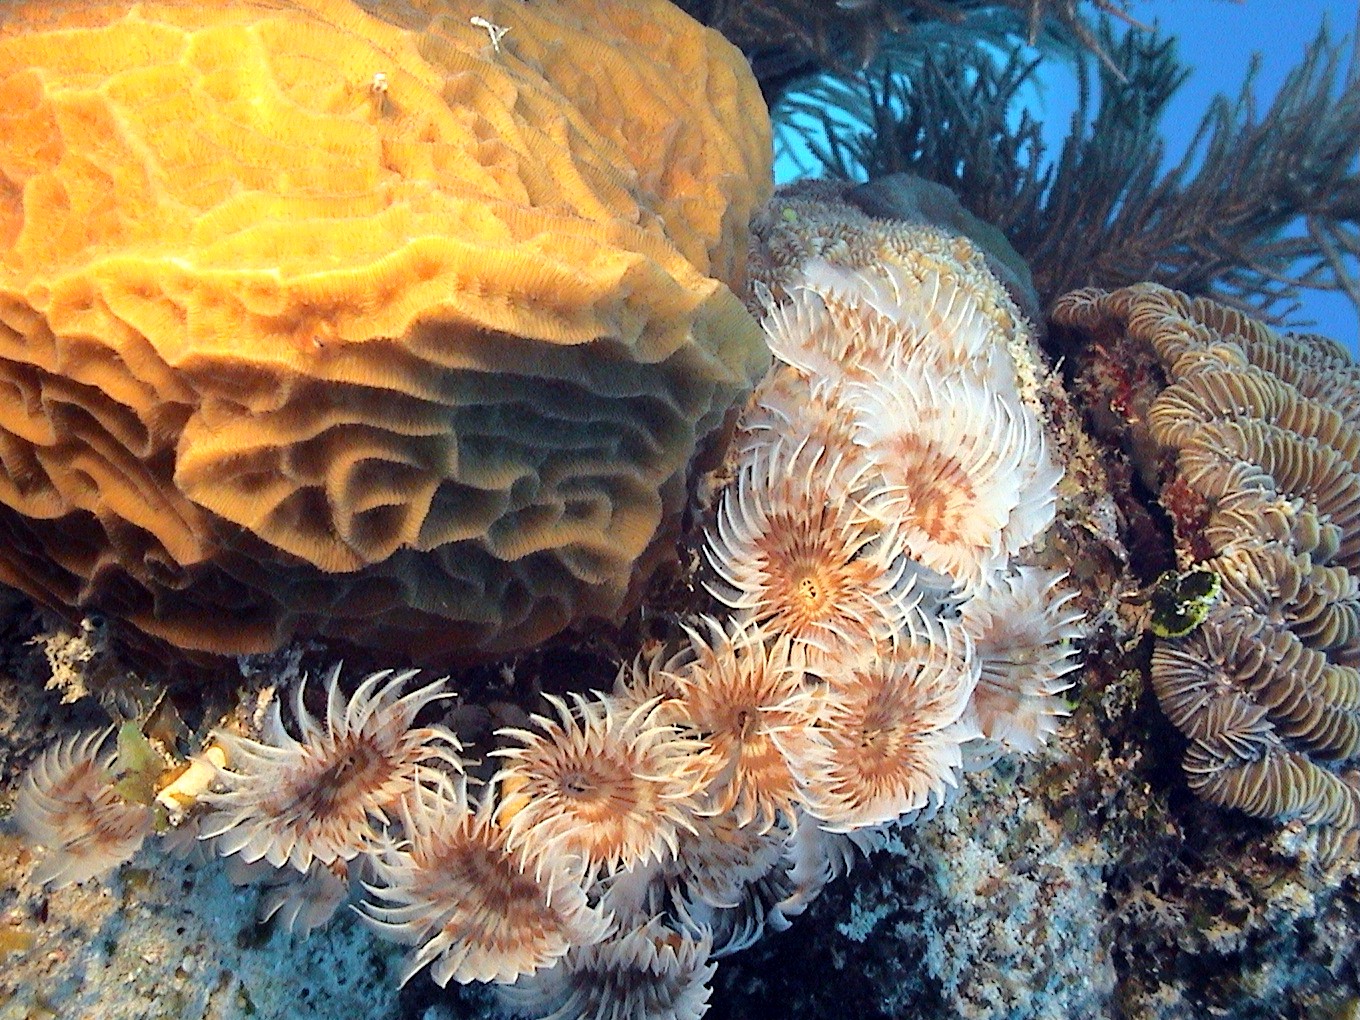 Tube Worms in Belize